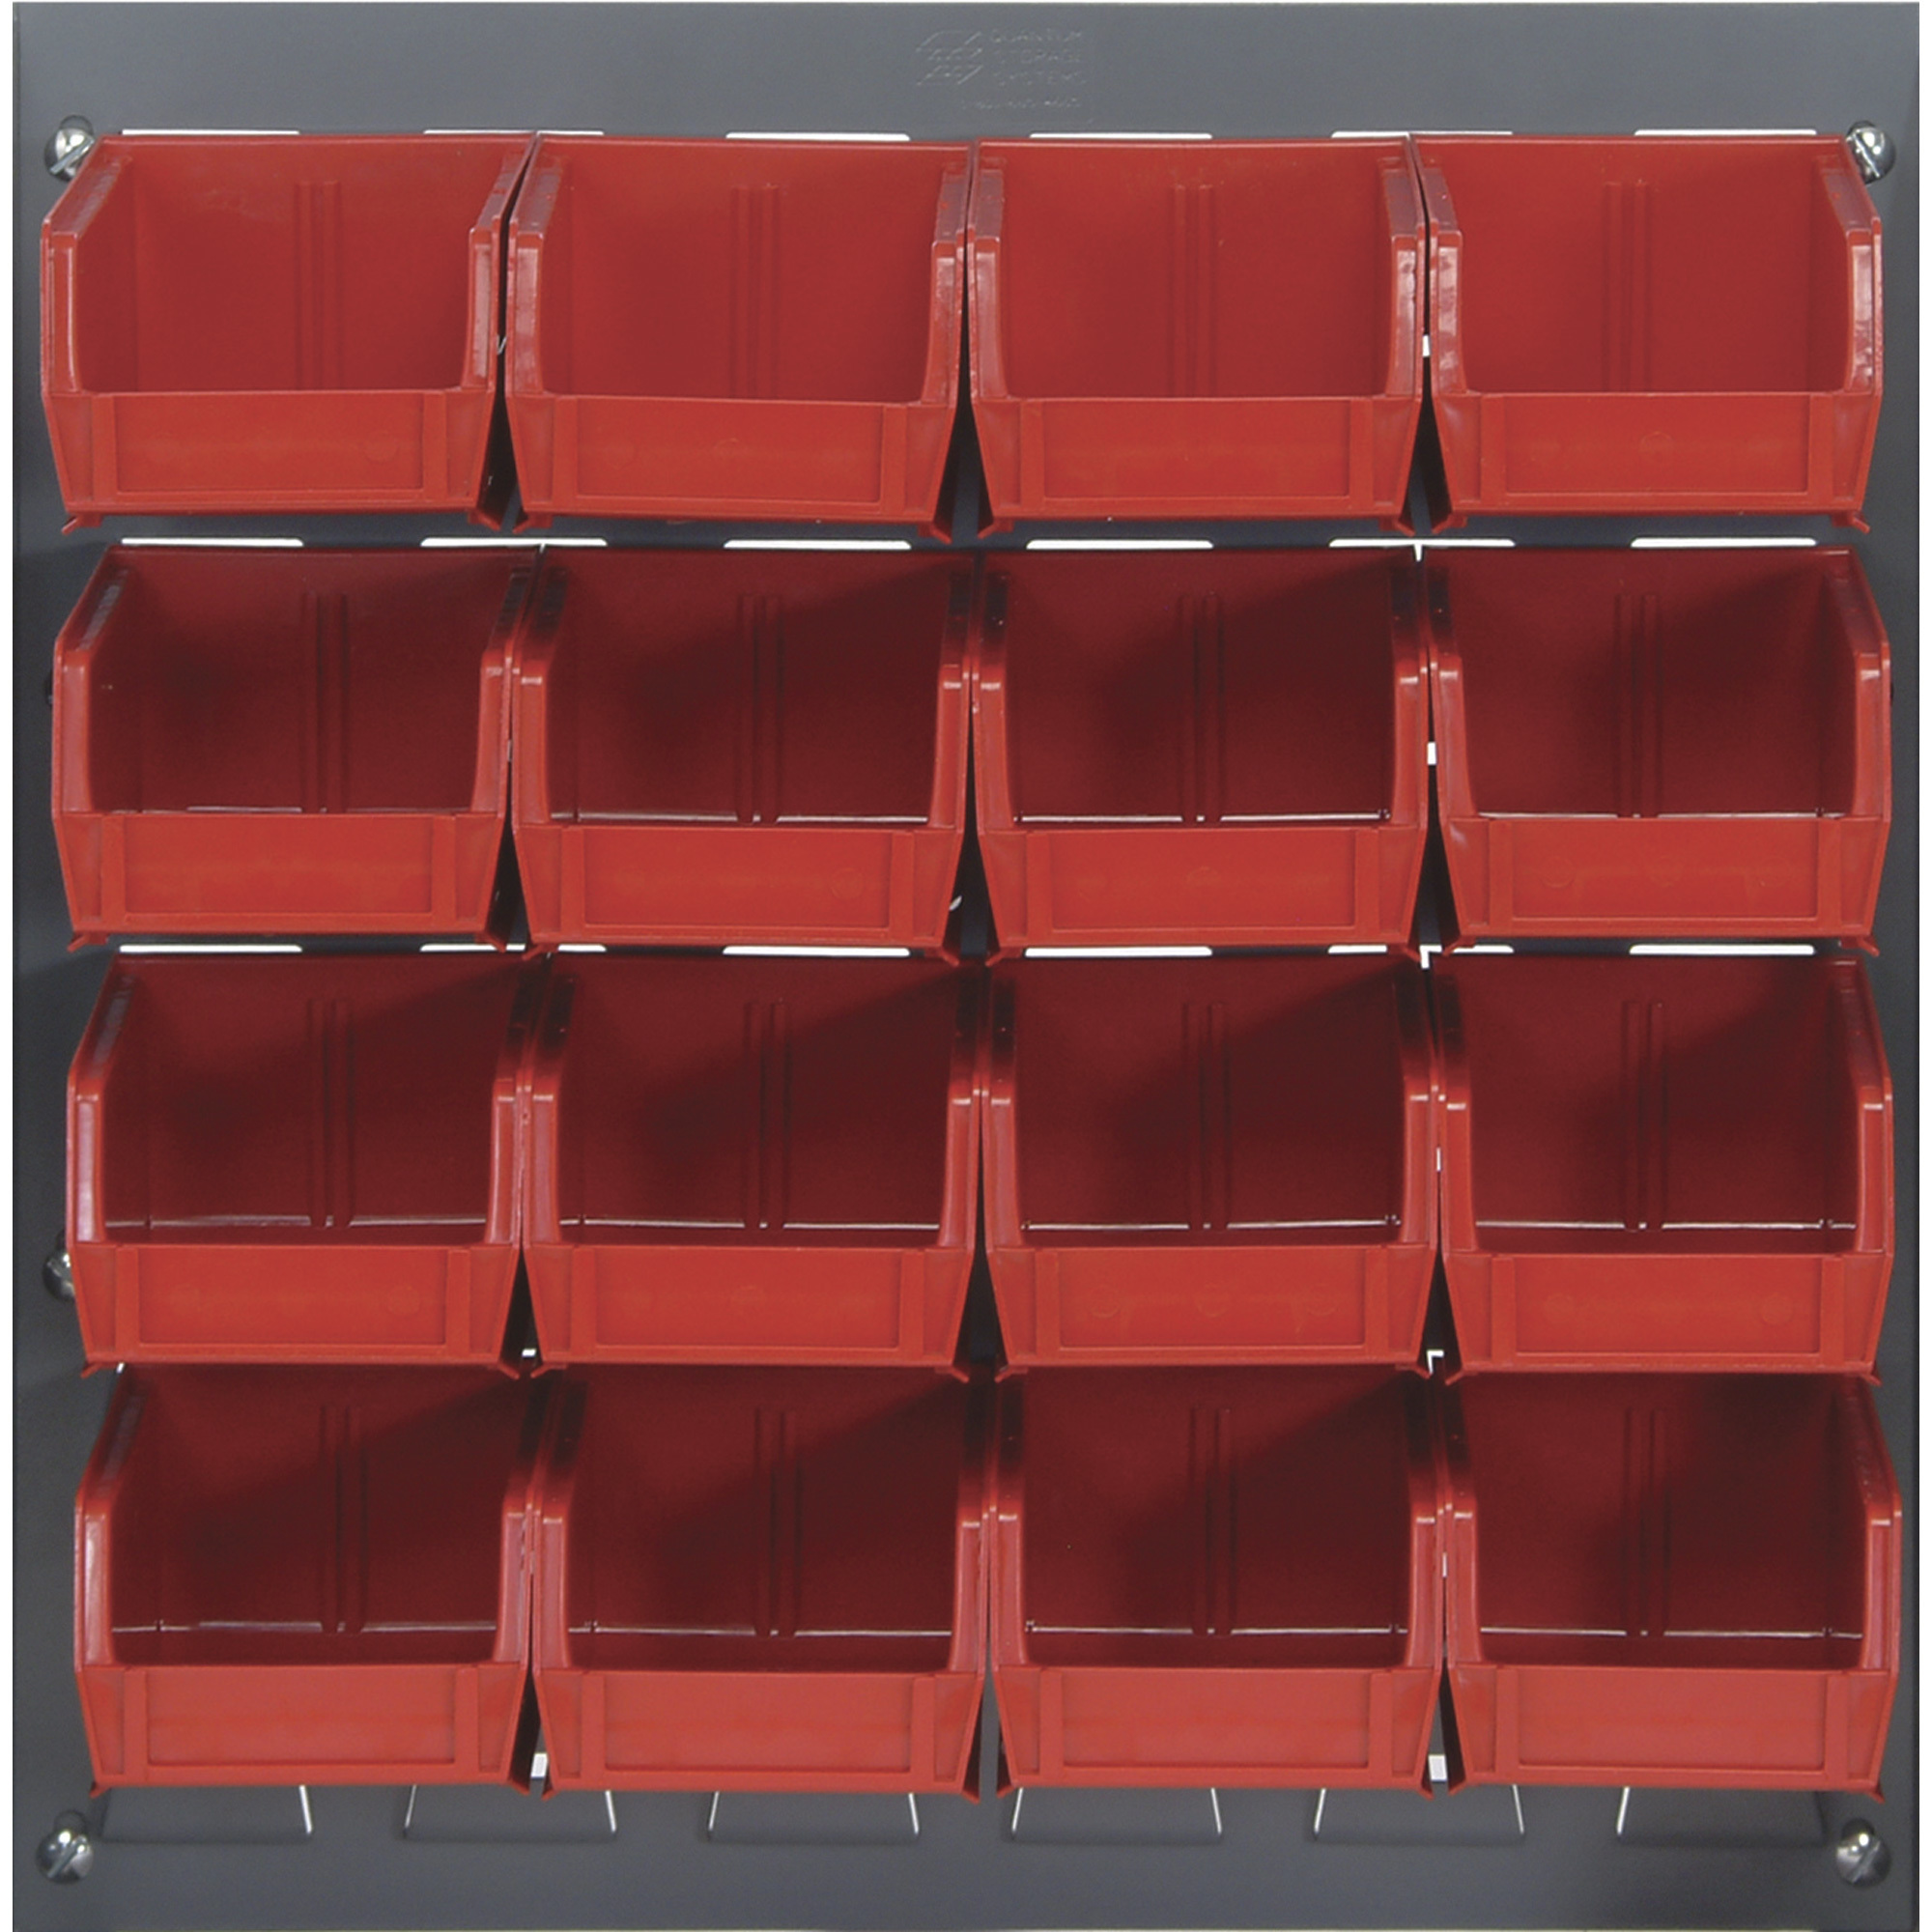 Quantum Storage Louvered Panel with 16 Bins, 18Inch L x 19Inch H Unit Size, Red, Model QLP-1819-220-16RD